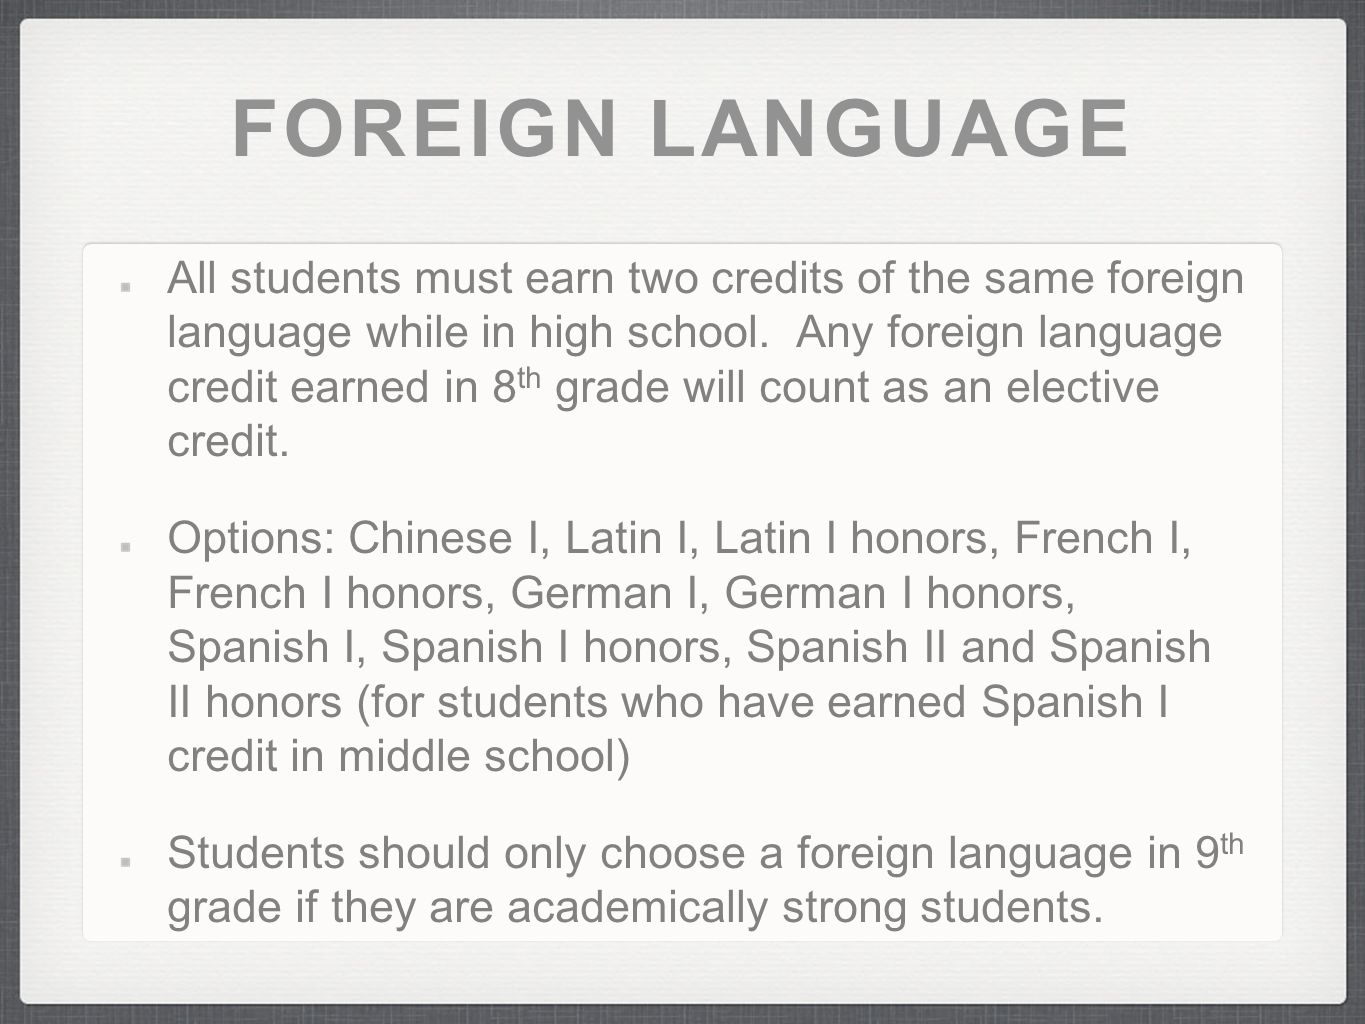 FOREIGN LANGUAGE All students must earn two credits of the same foreign language while in high school.